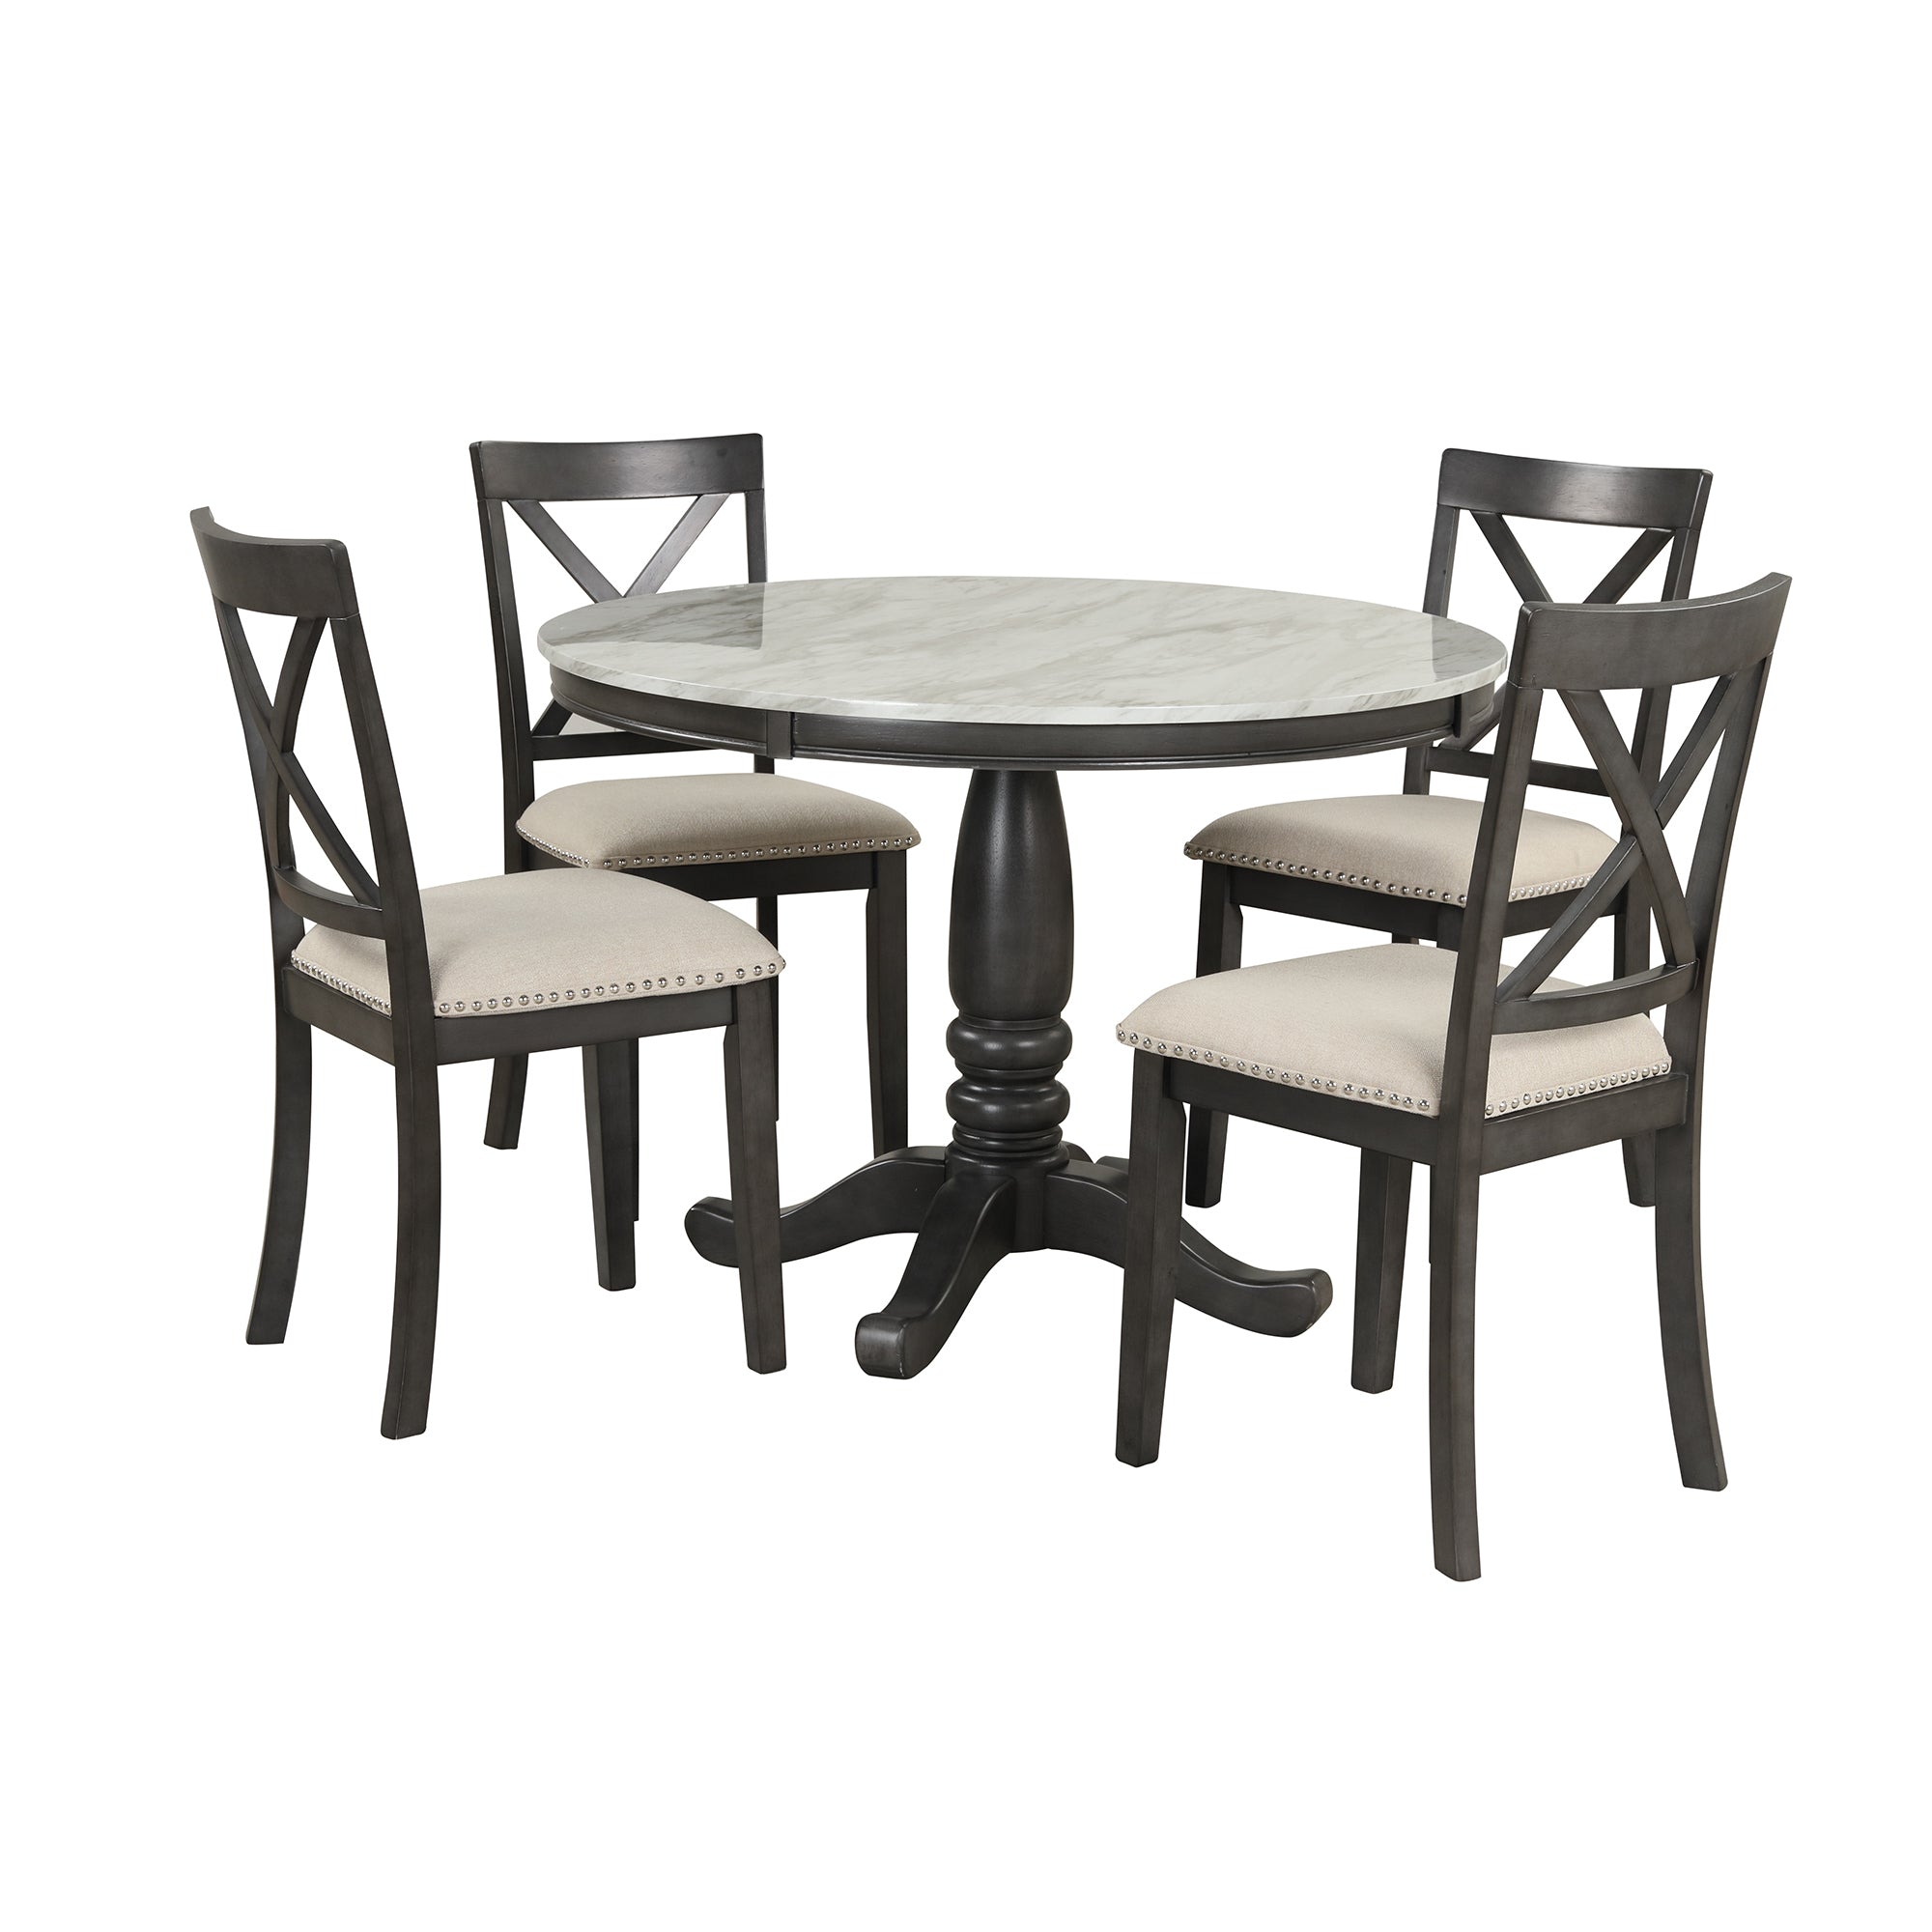 oliver. 5 Sets of 1 Solid Wood Table with 4 Chairs